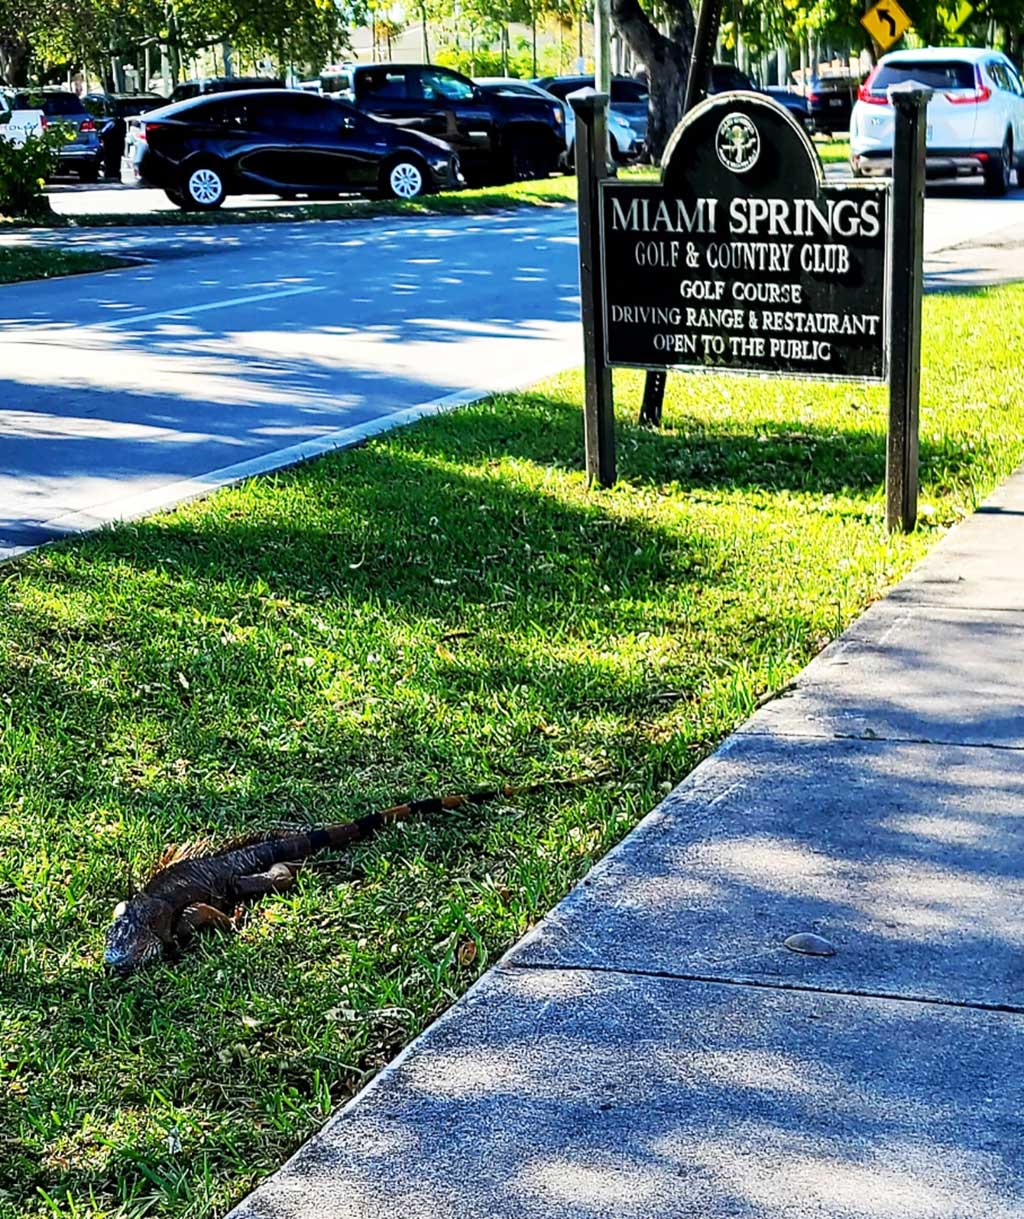 Big Frozen Iguana at Miami Springs Country Club